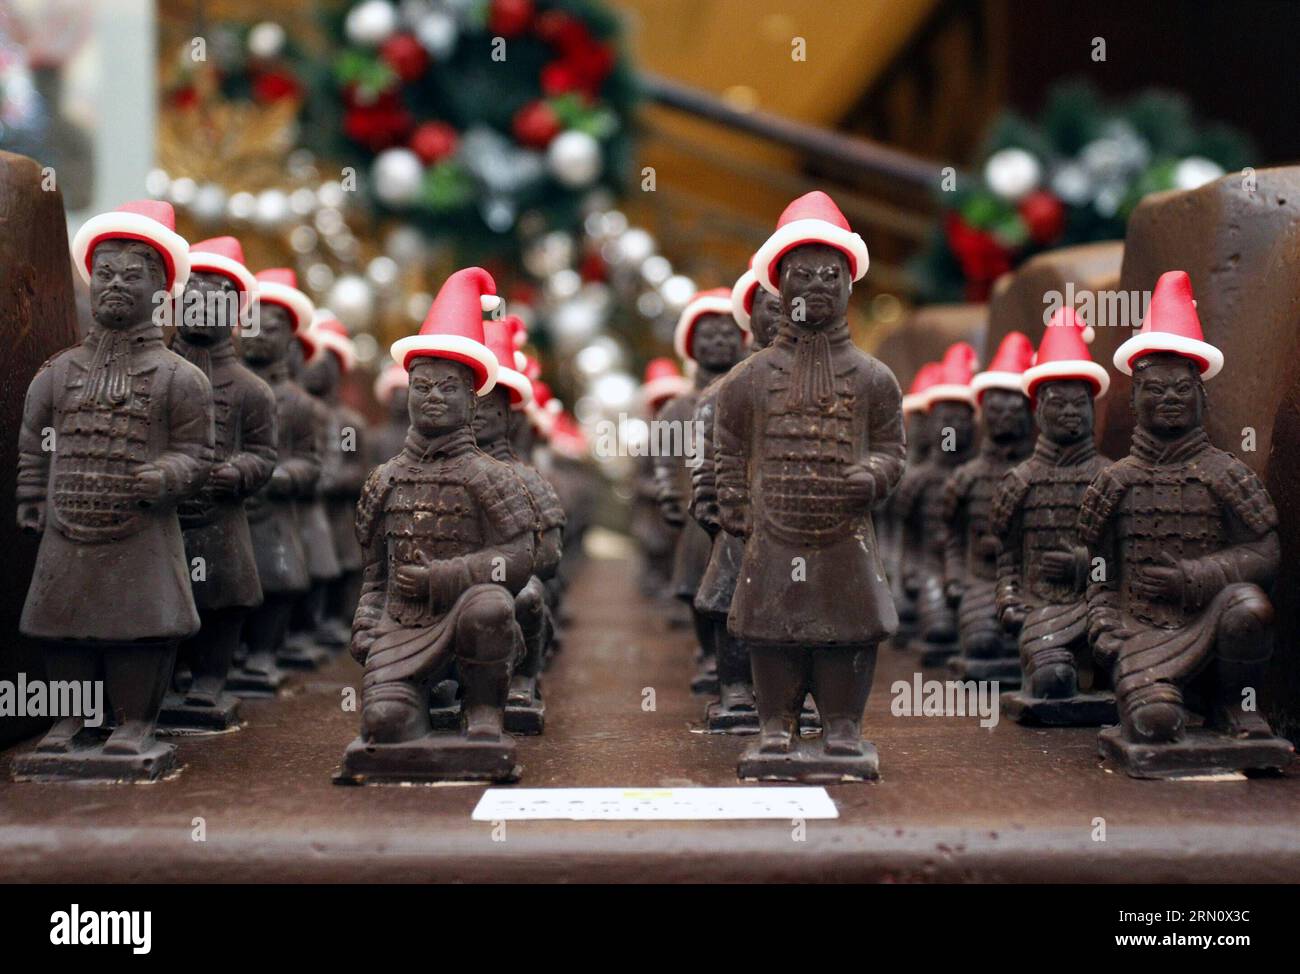 AKTUELLES ZEITGESCHEHEN Chinesische Terracotta Armee aus Schokolade A squad of chocolate miniature Terracotta Warriors wearing Santa hats stand on display at a hotel in Xi an, capital of northwest China s Shaanxi Province, Nov. 23, 2014. Pastry chefs of a hotel in Xi an have turned 100 kilograms of chocolate into miniatures imitative of members of the Terracotta Army, a set of lifesize ancient Chinese army sculptures from the 3rd century B.C., with Santa hats attached to the miniatures to mark the upcoming Christmas. ) (lmm) CHINA-SHAANXI-XI AN-CHOCOLATE-TERRACOTTA ARMY-CHRISTMAS (CN) JiaoxHon Stock Photo